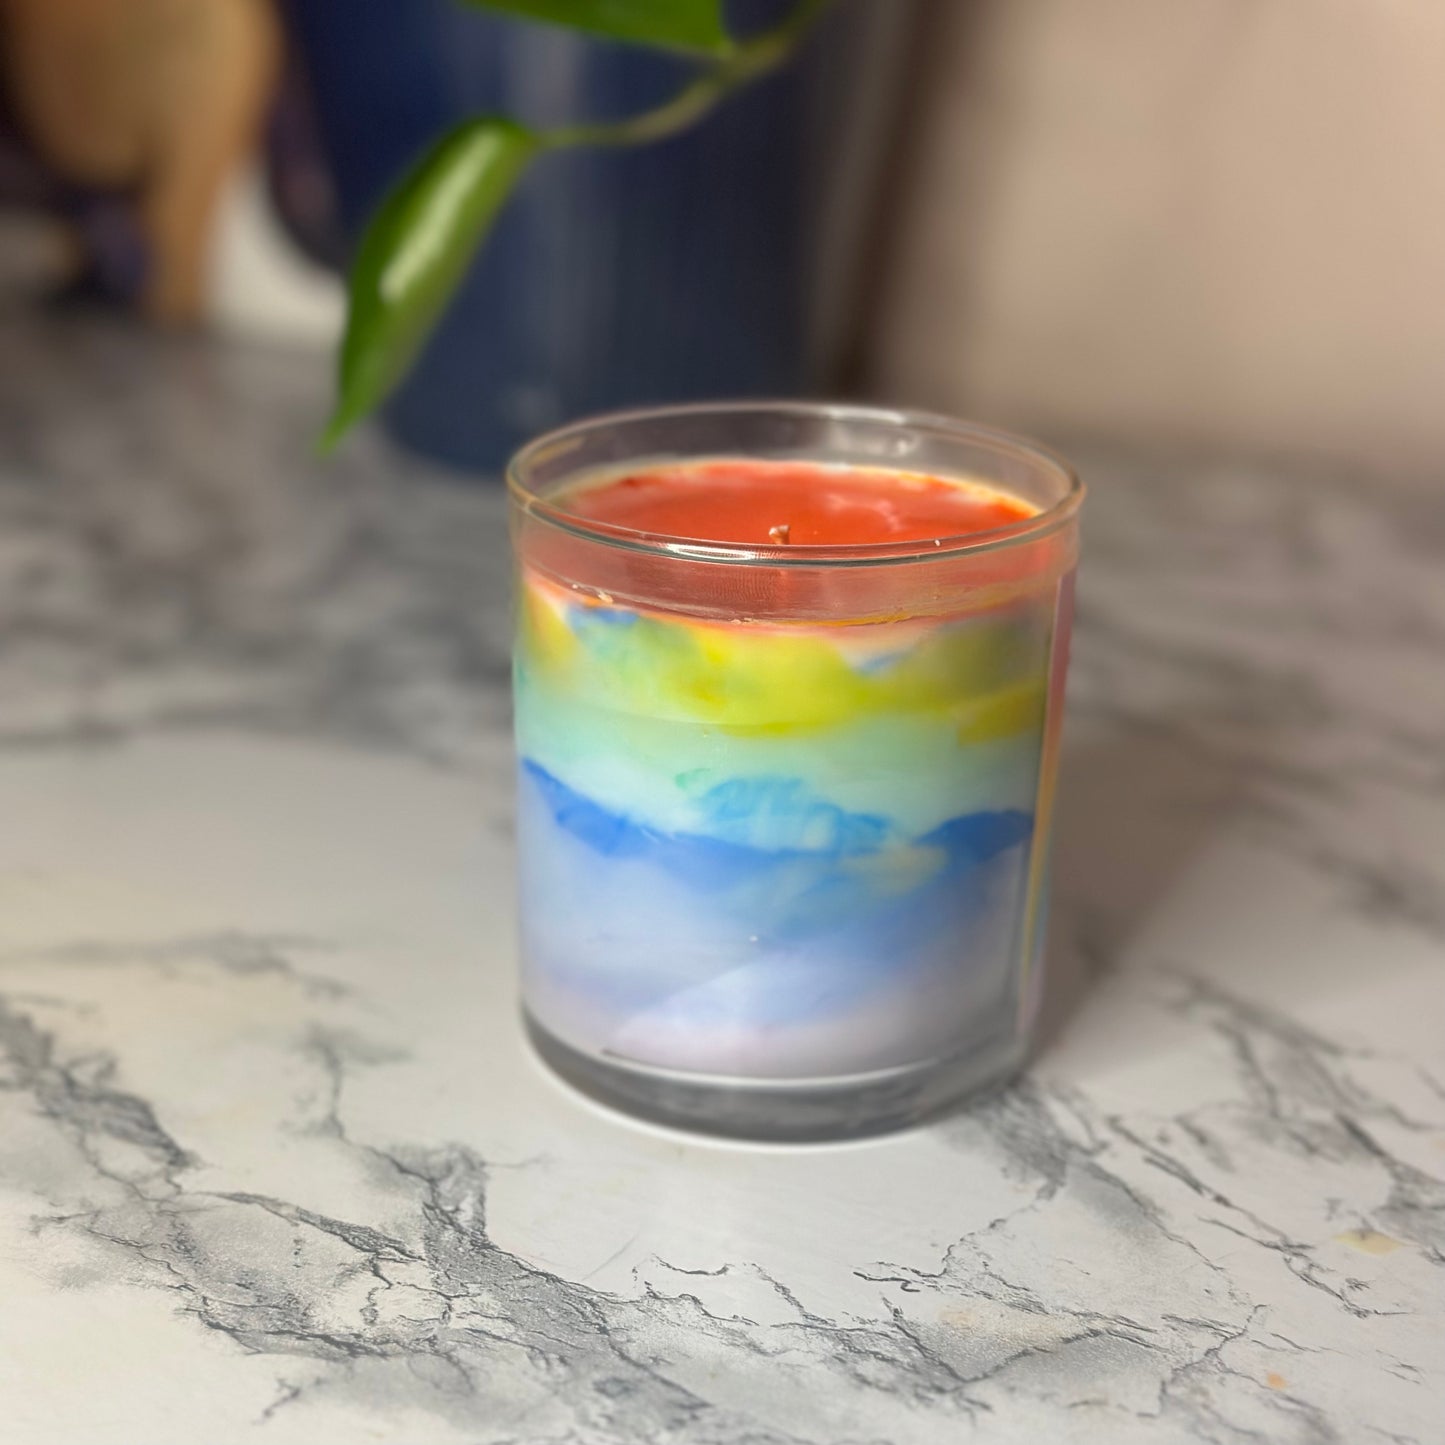 PRIDE Candle